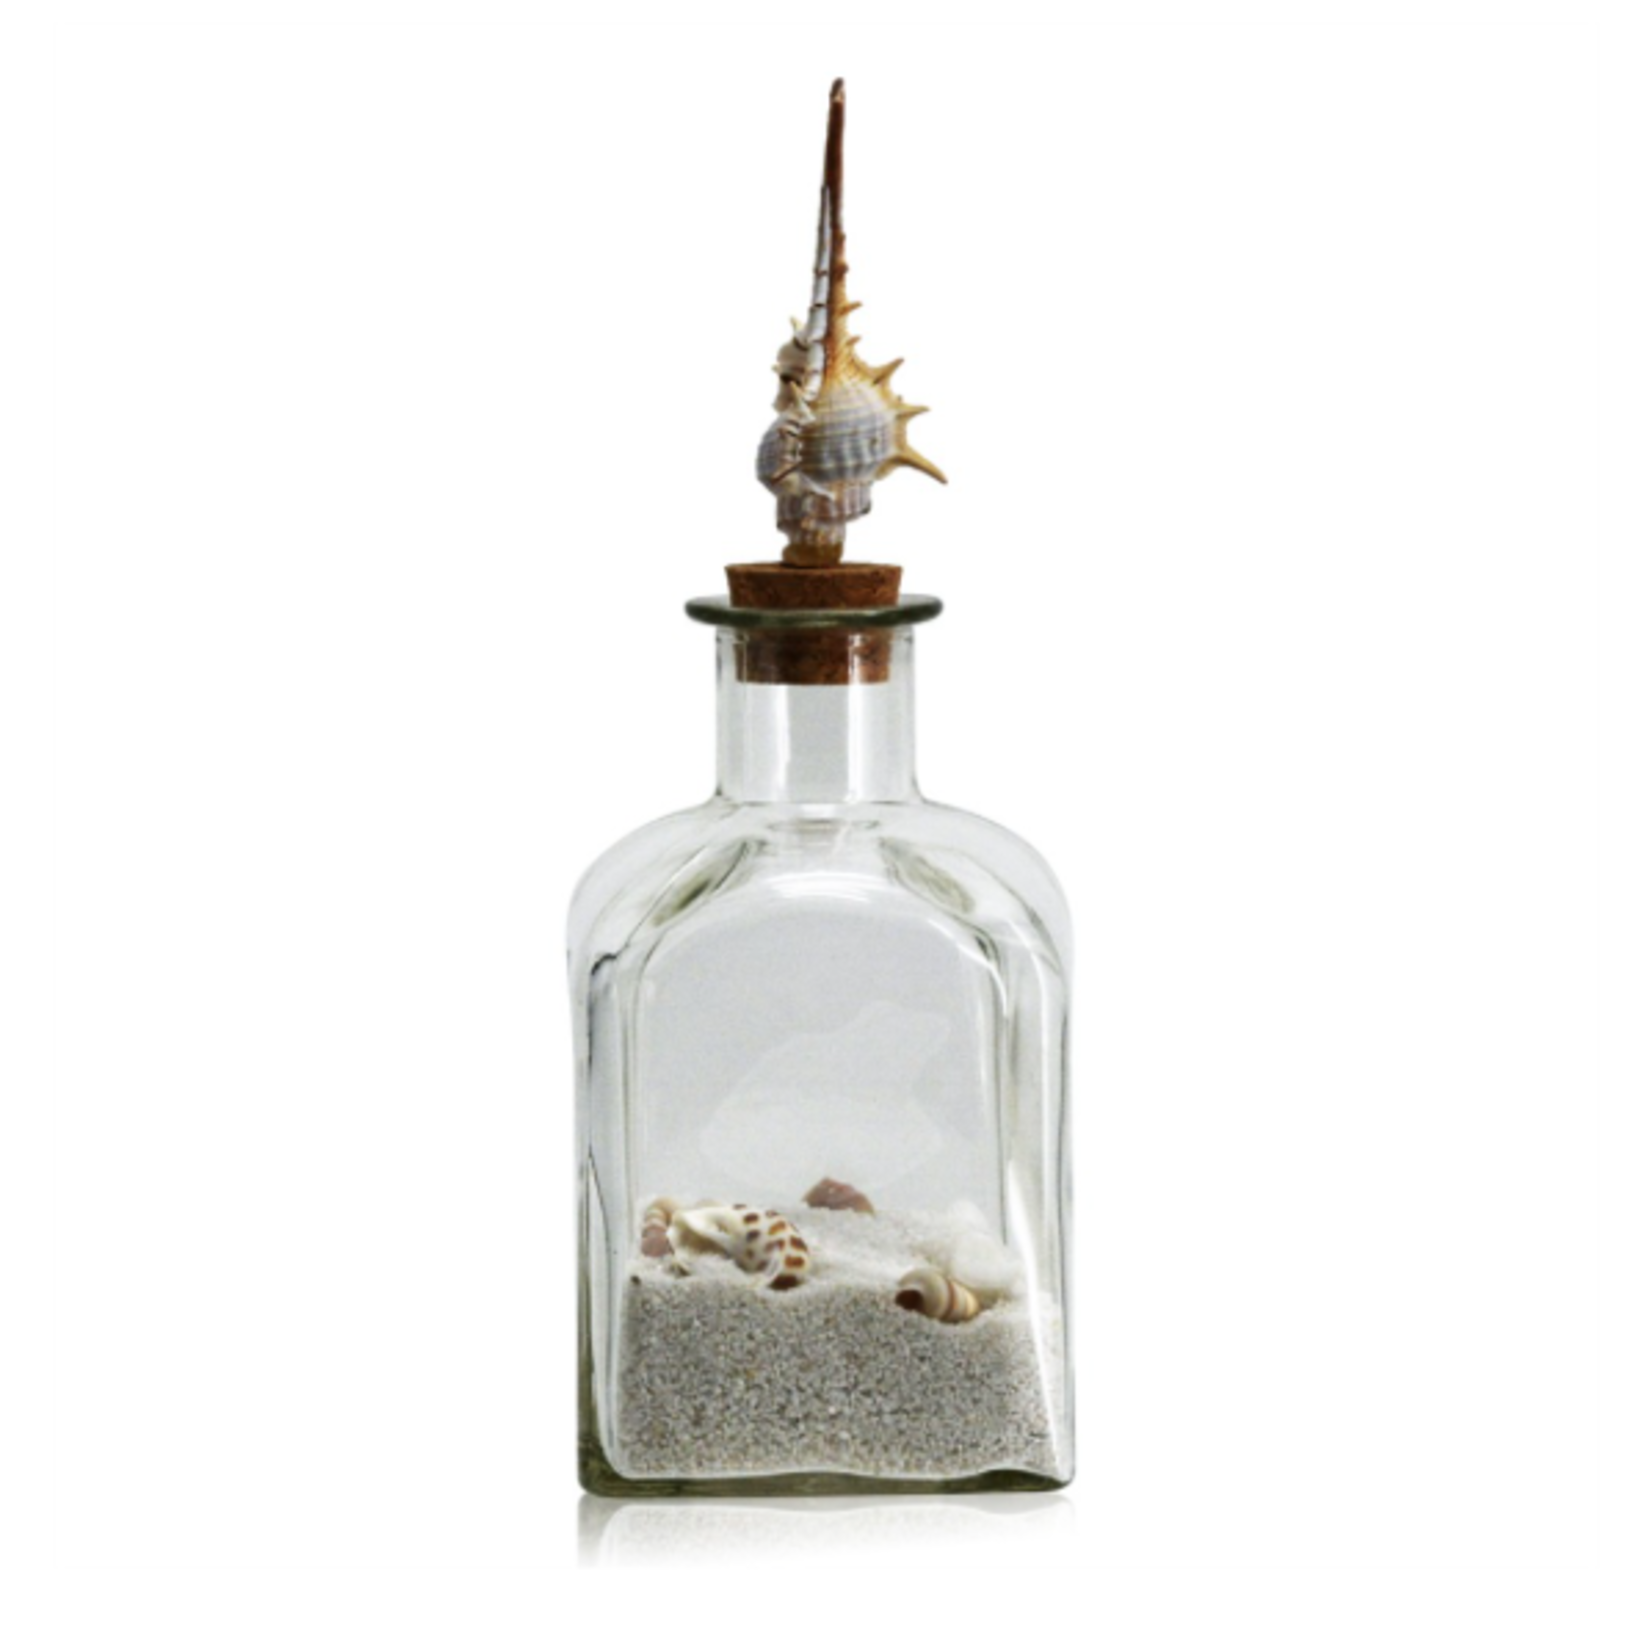 40% off was $10.50 now $6.29. 9”H X 4.75” NAUTICAL SAND BUD VASES WITH SAND AND SHELLS INCLUDED